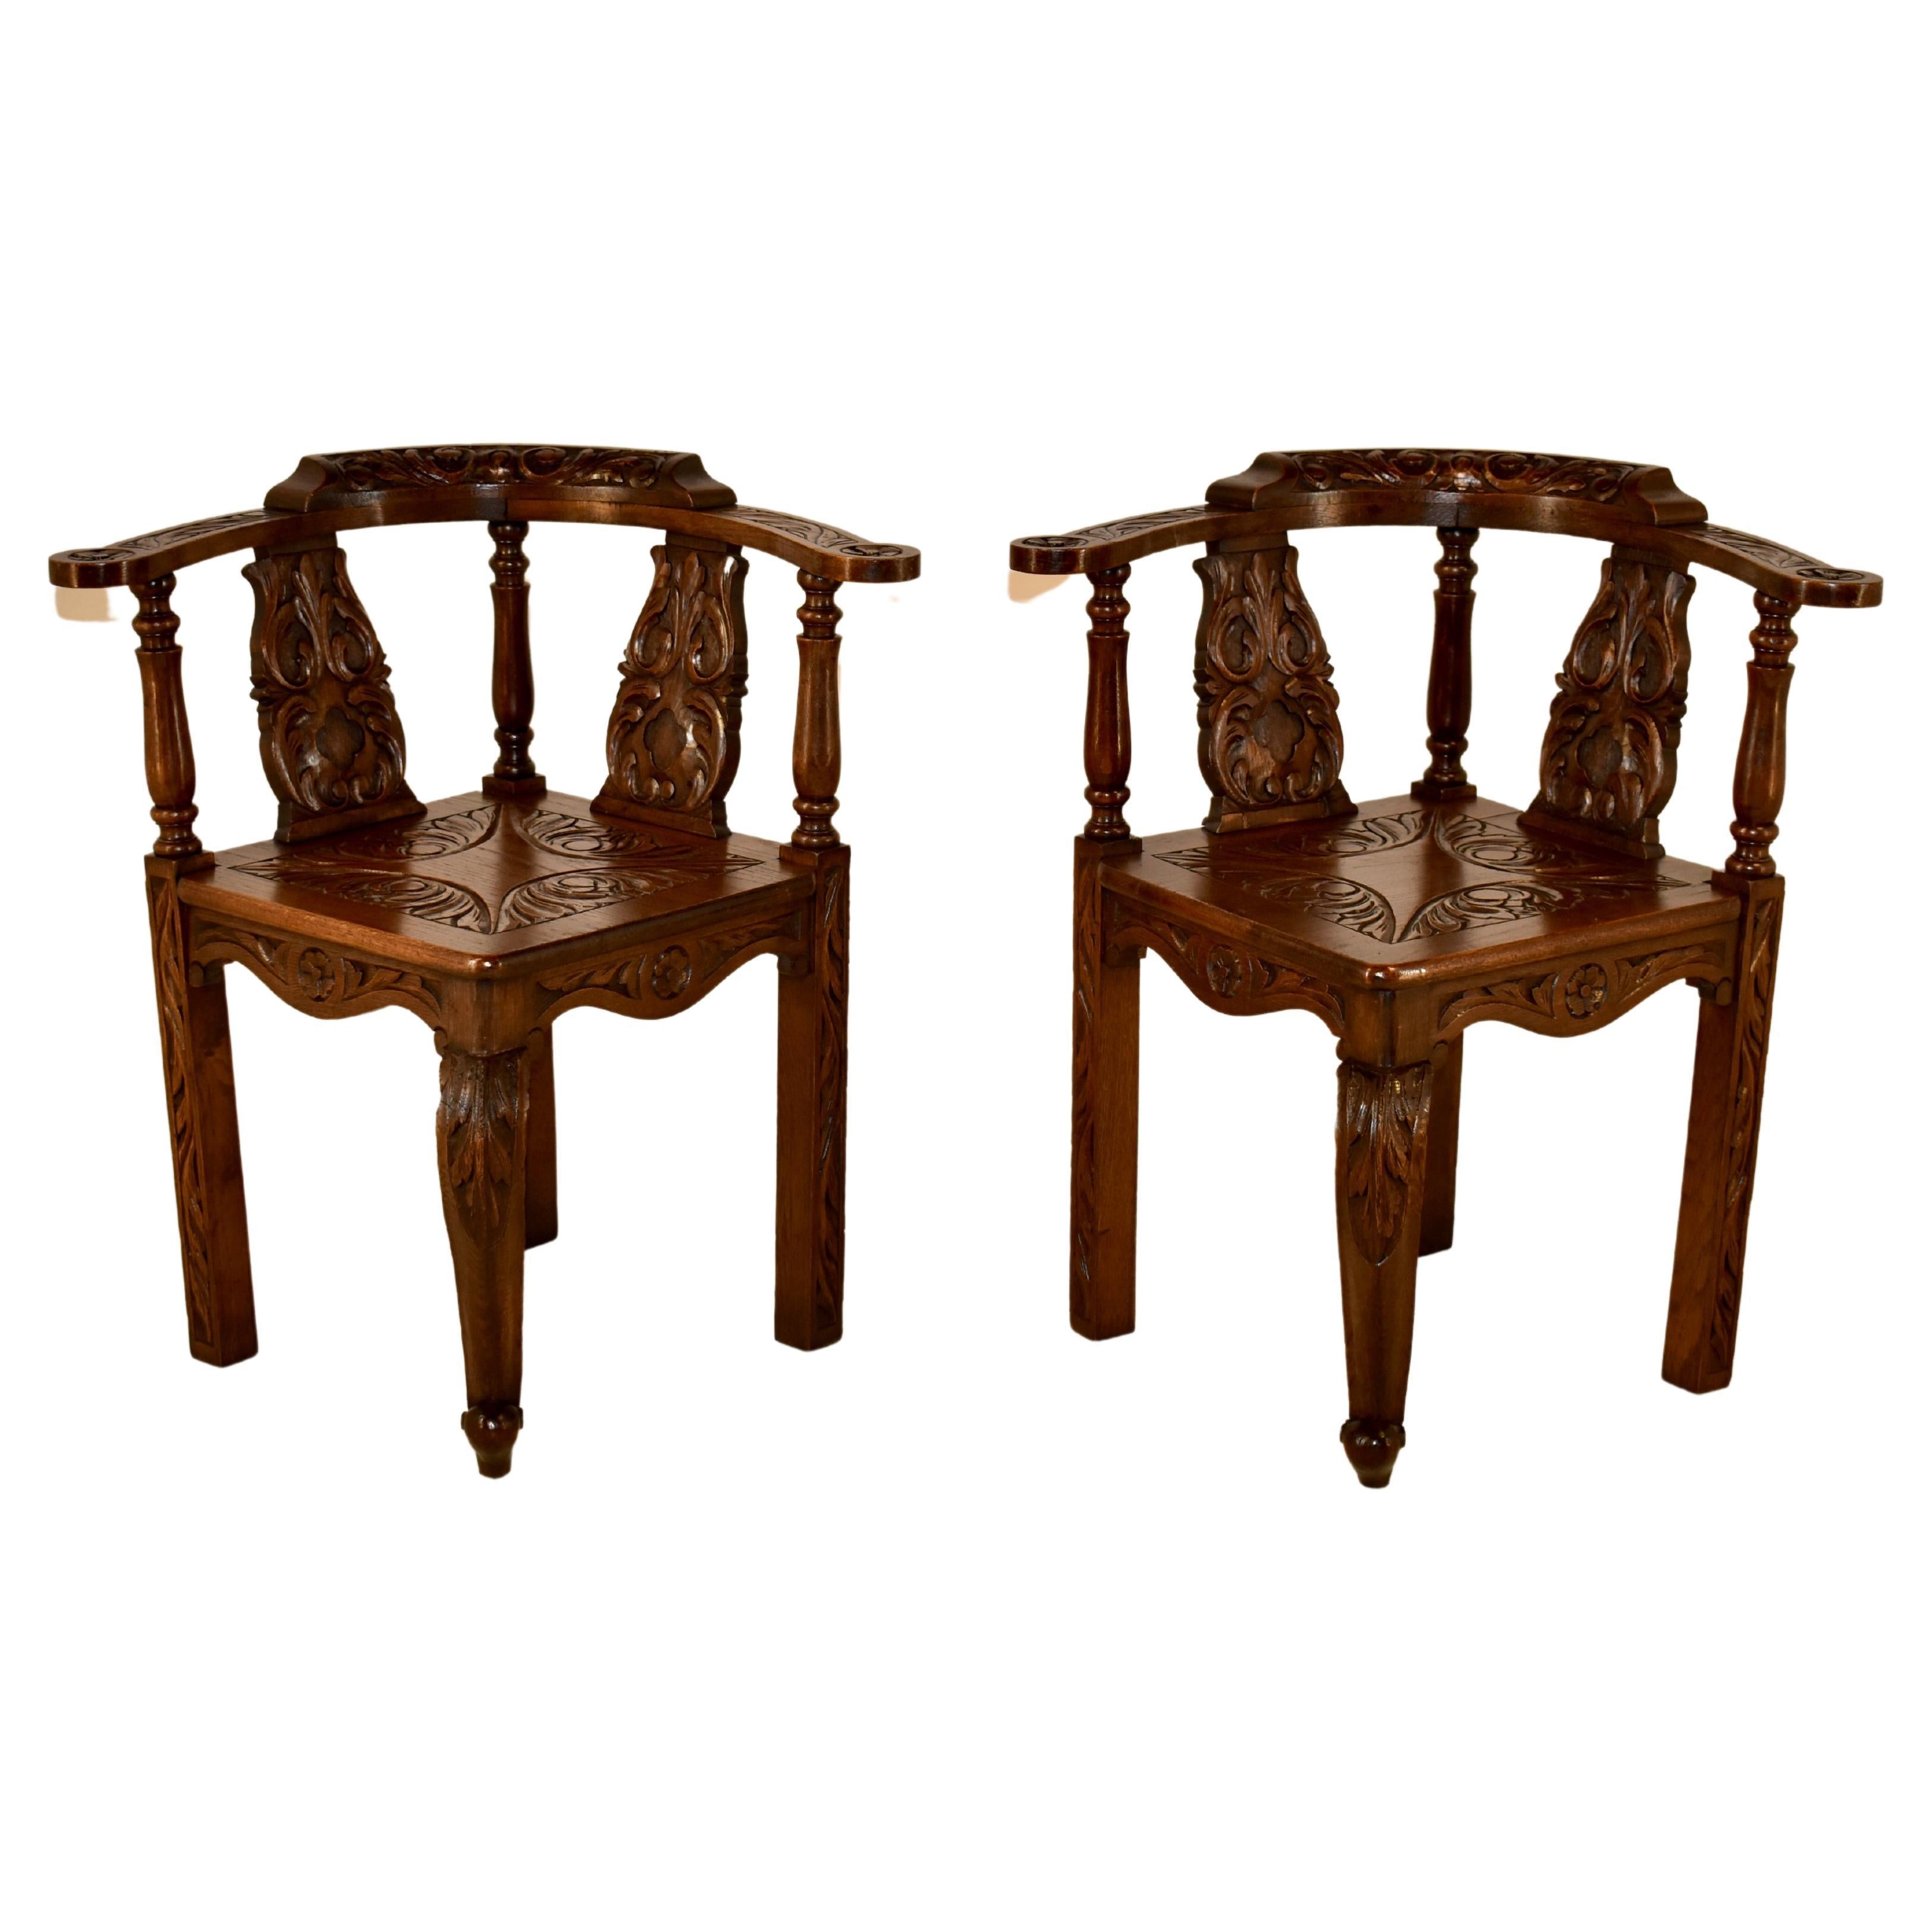 Pair of 19th century carved oak corner chairs from England with a wonderfully carved back, supports and arms, all depicting acanthus leaves and scrolls. The seats have wonderful carving as well over a single cabriole leg in the front and three stout